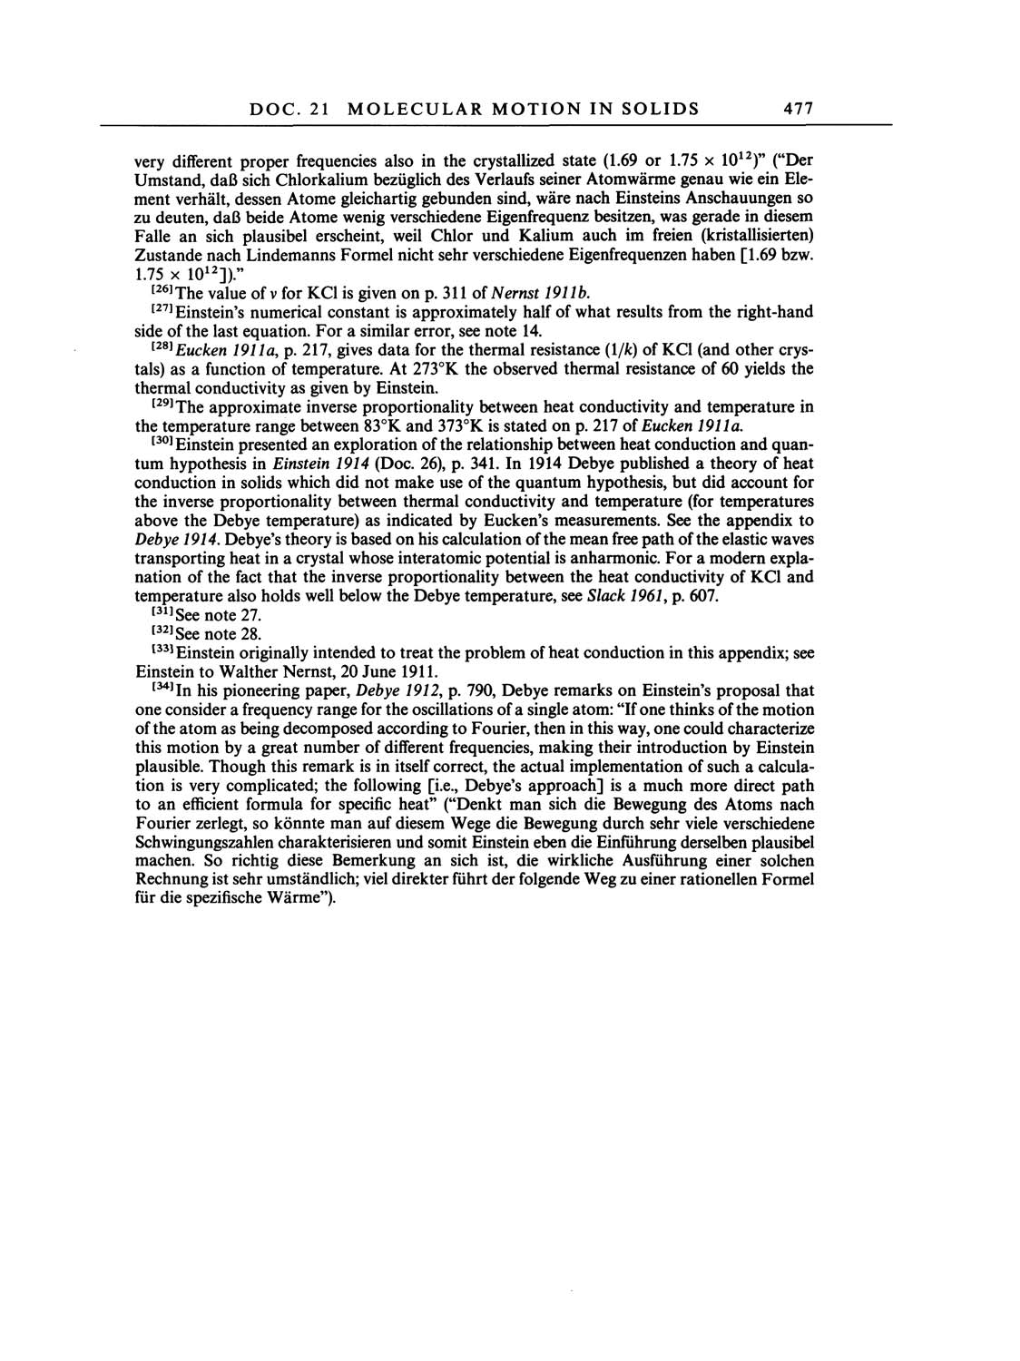 Volume 3: The Swiss Years: Writings 1909-1911 page 477